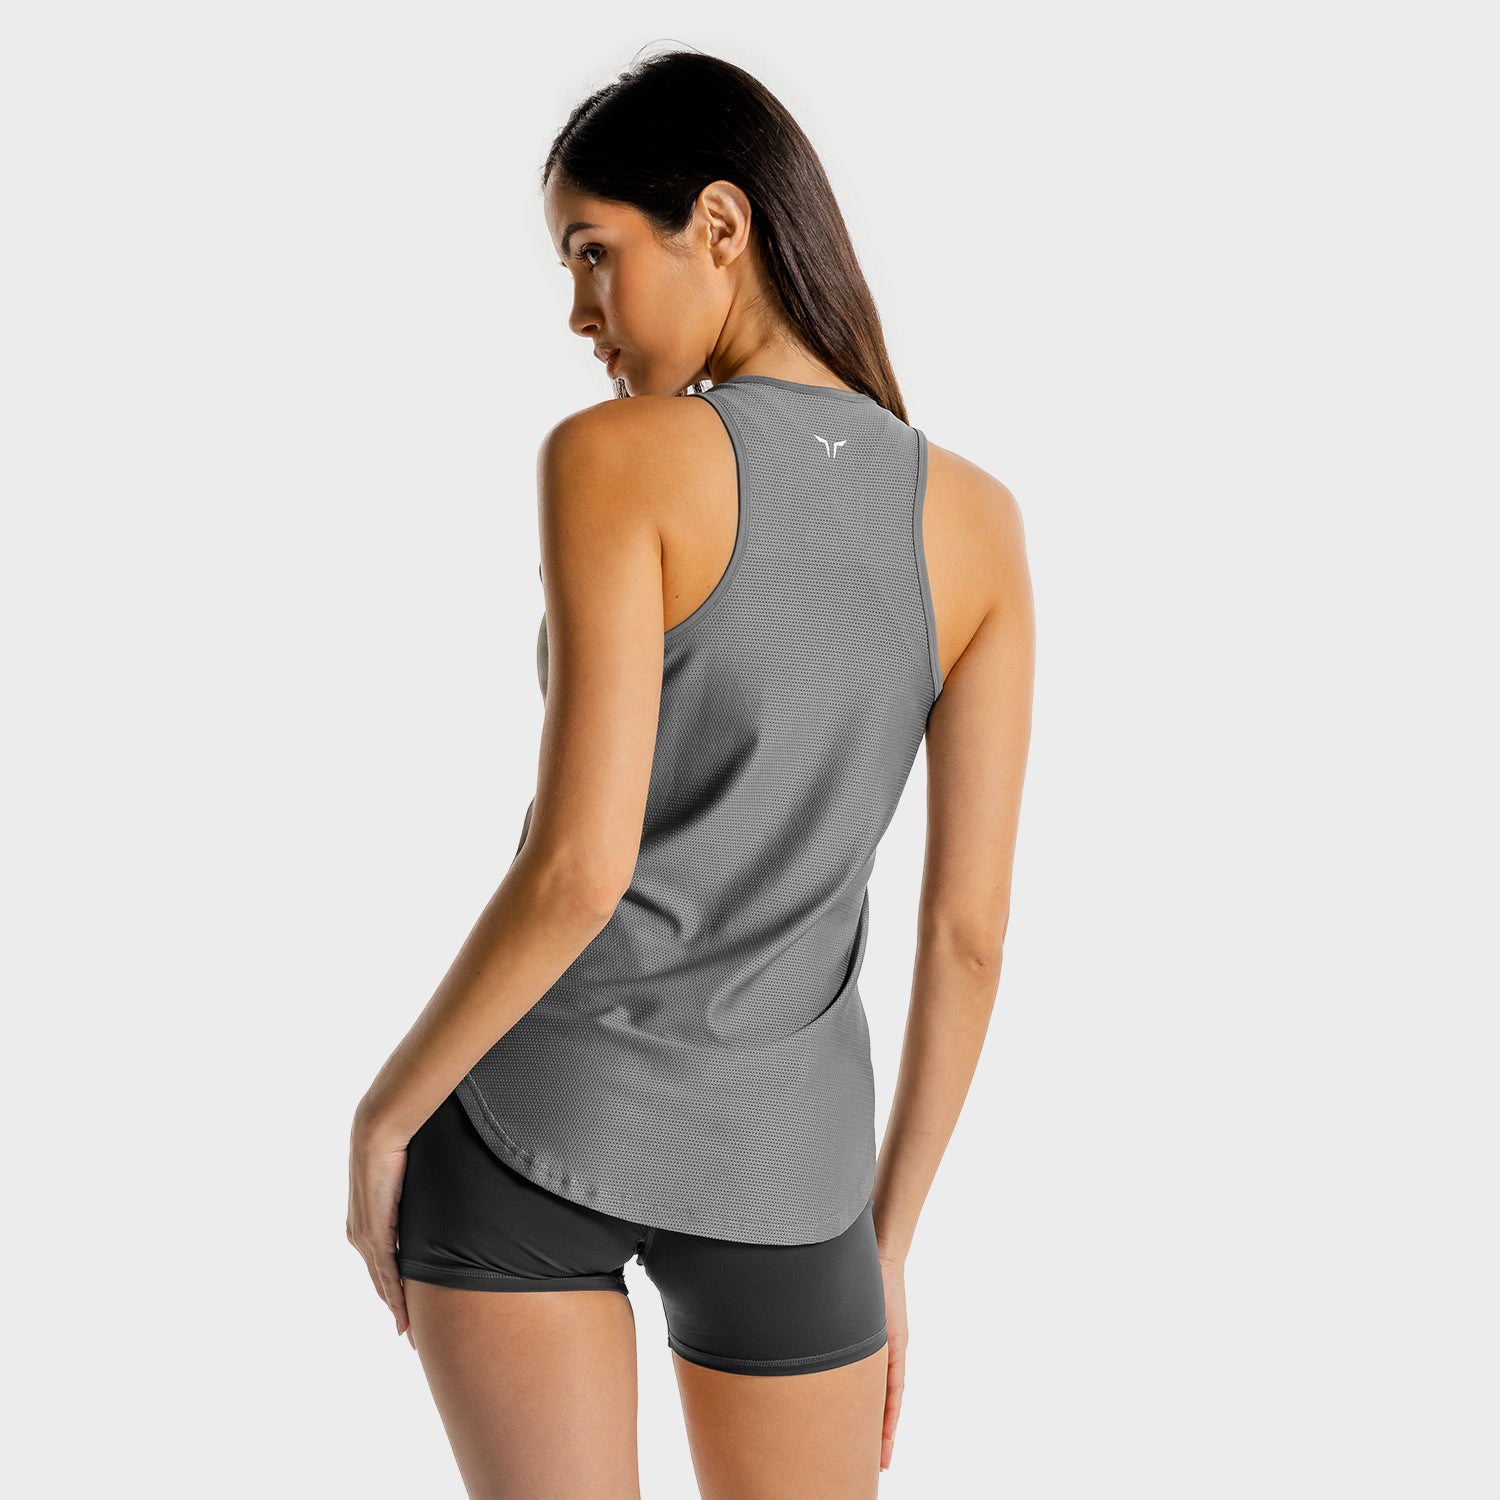 squatwolf-workout-clothes-core-tank-grey-gym-tank-tops-for-women